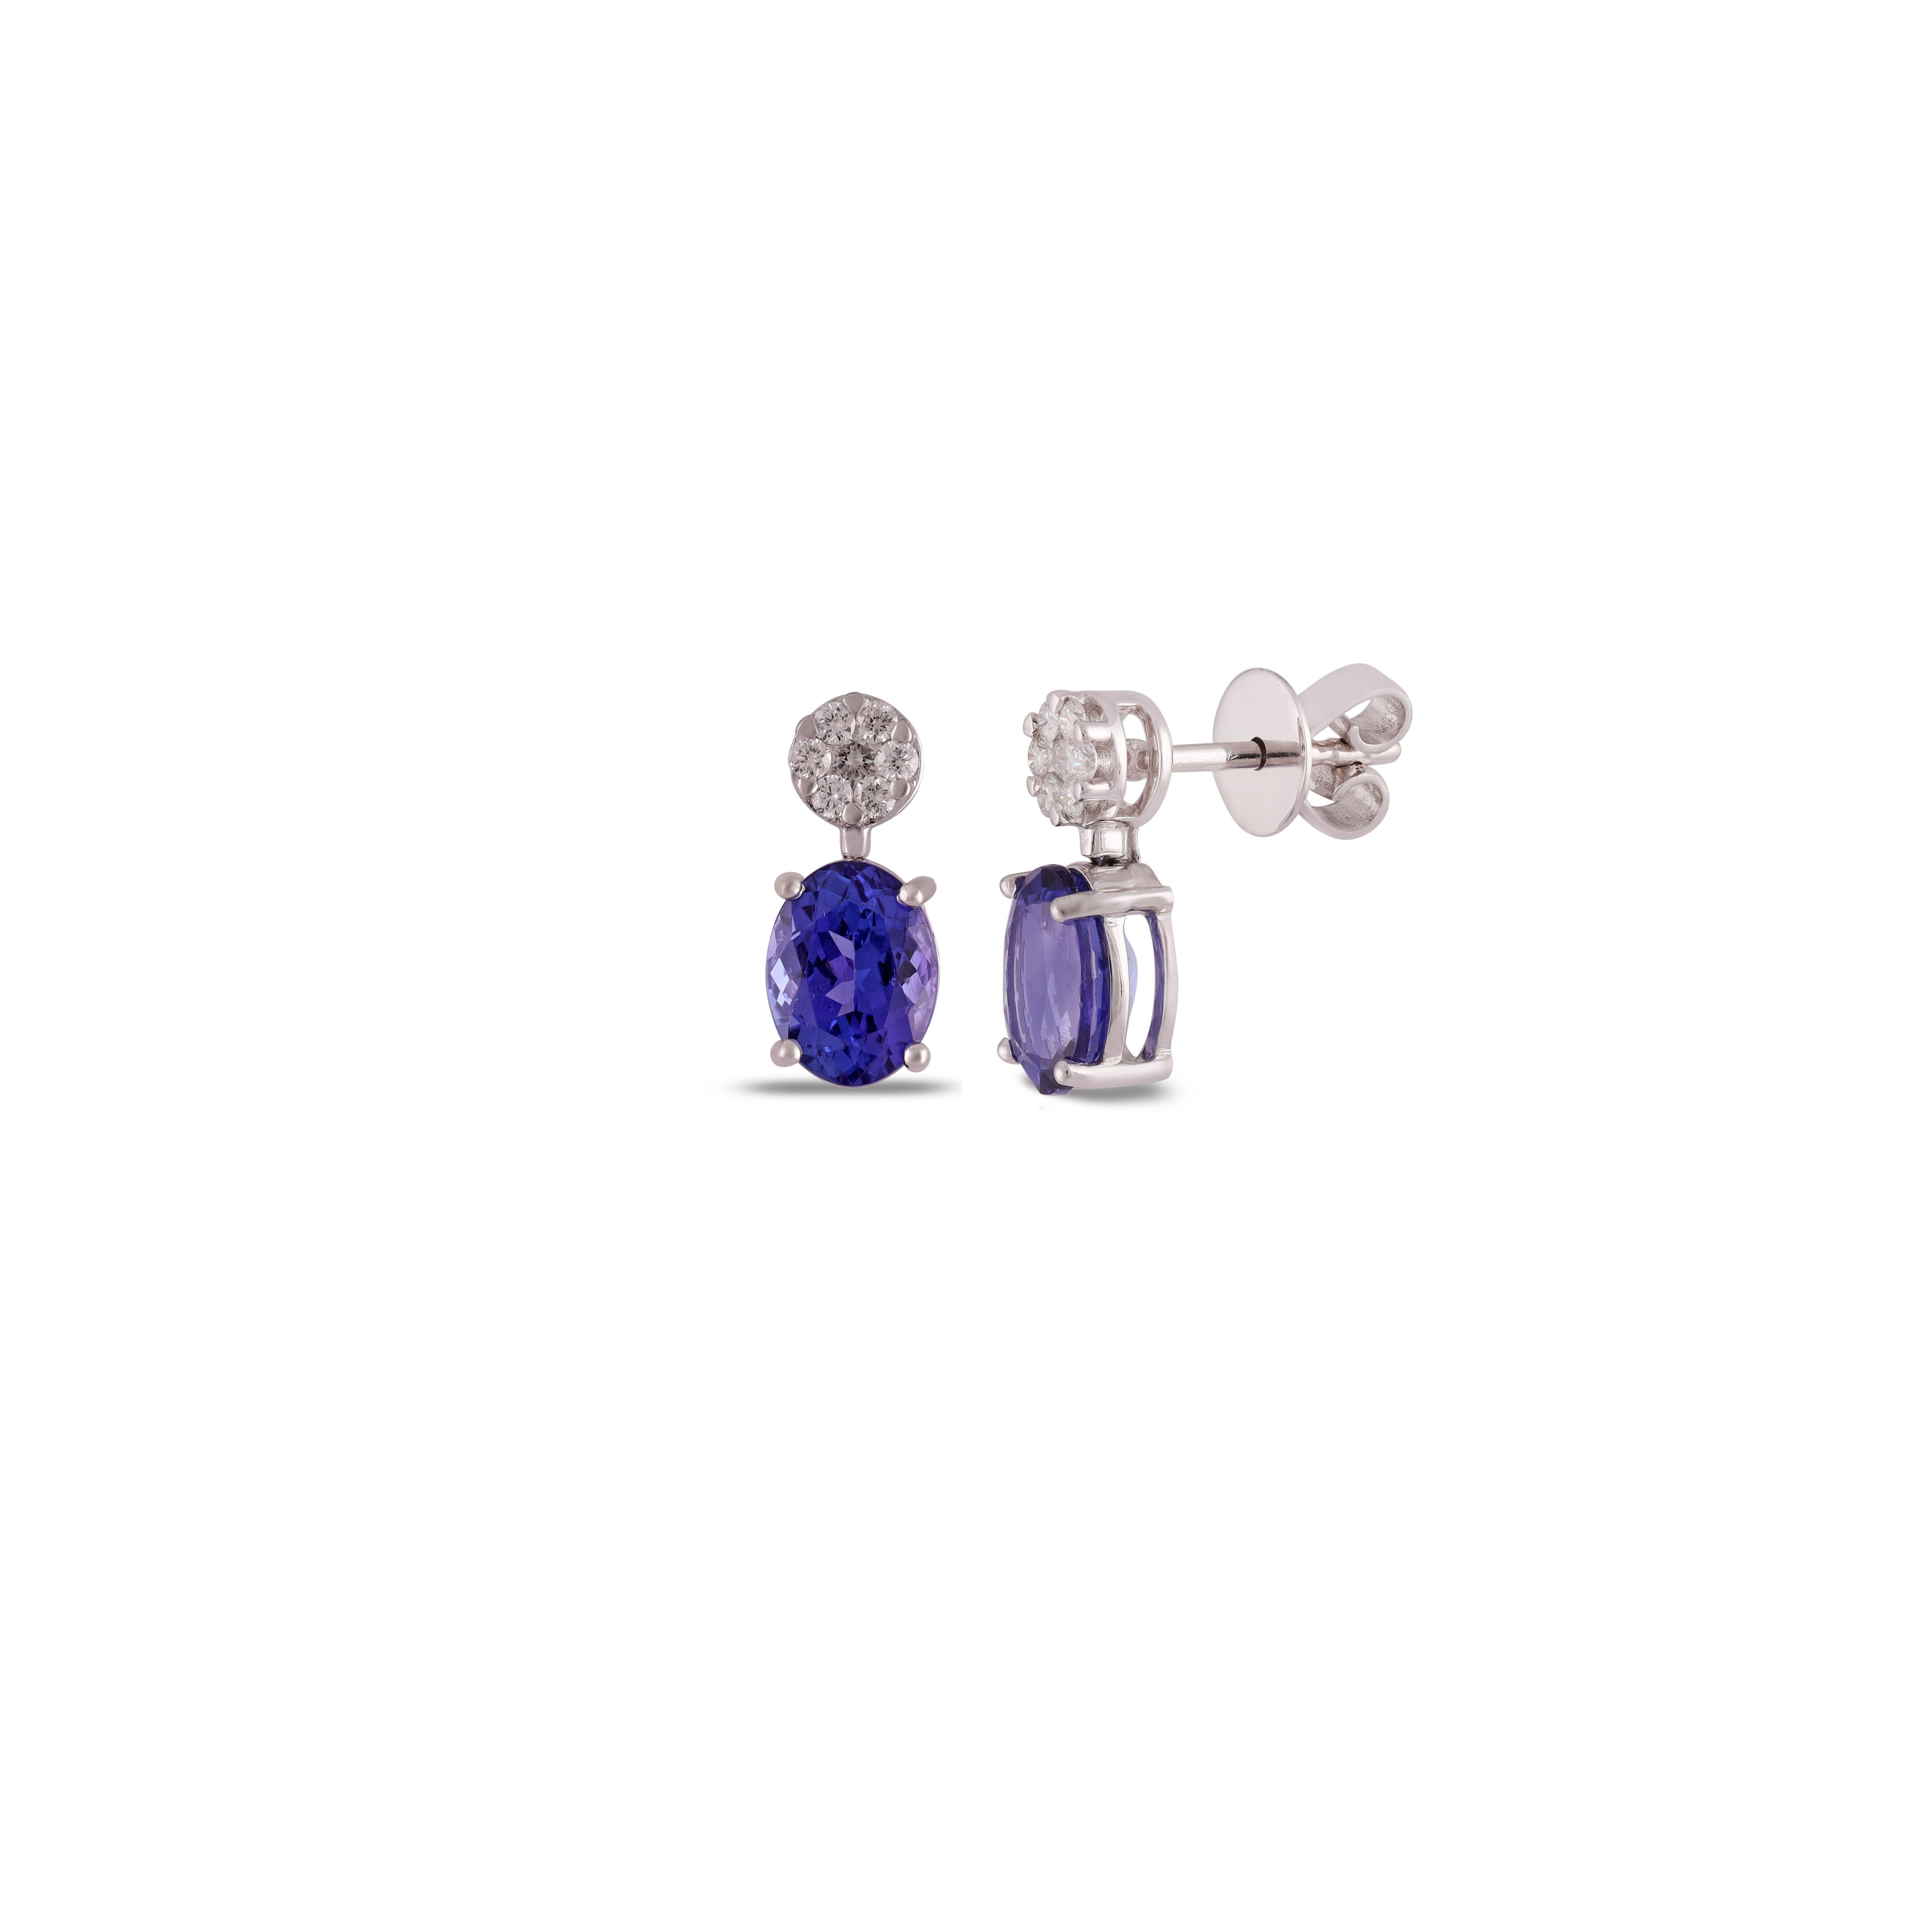 If you are looking for Tanzanite & Diamond earrings, this is the ultimate find, 2.73 carats of the finest Tanzanite, Diamond 2.97 Carat . Perfectly matched in color and size. The diamonds  0.24 Carat .
Earring come along with Box.